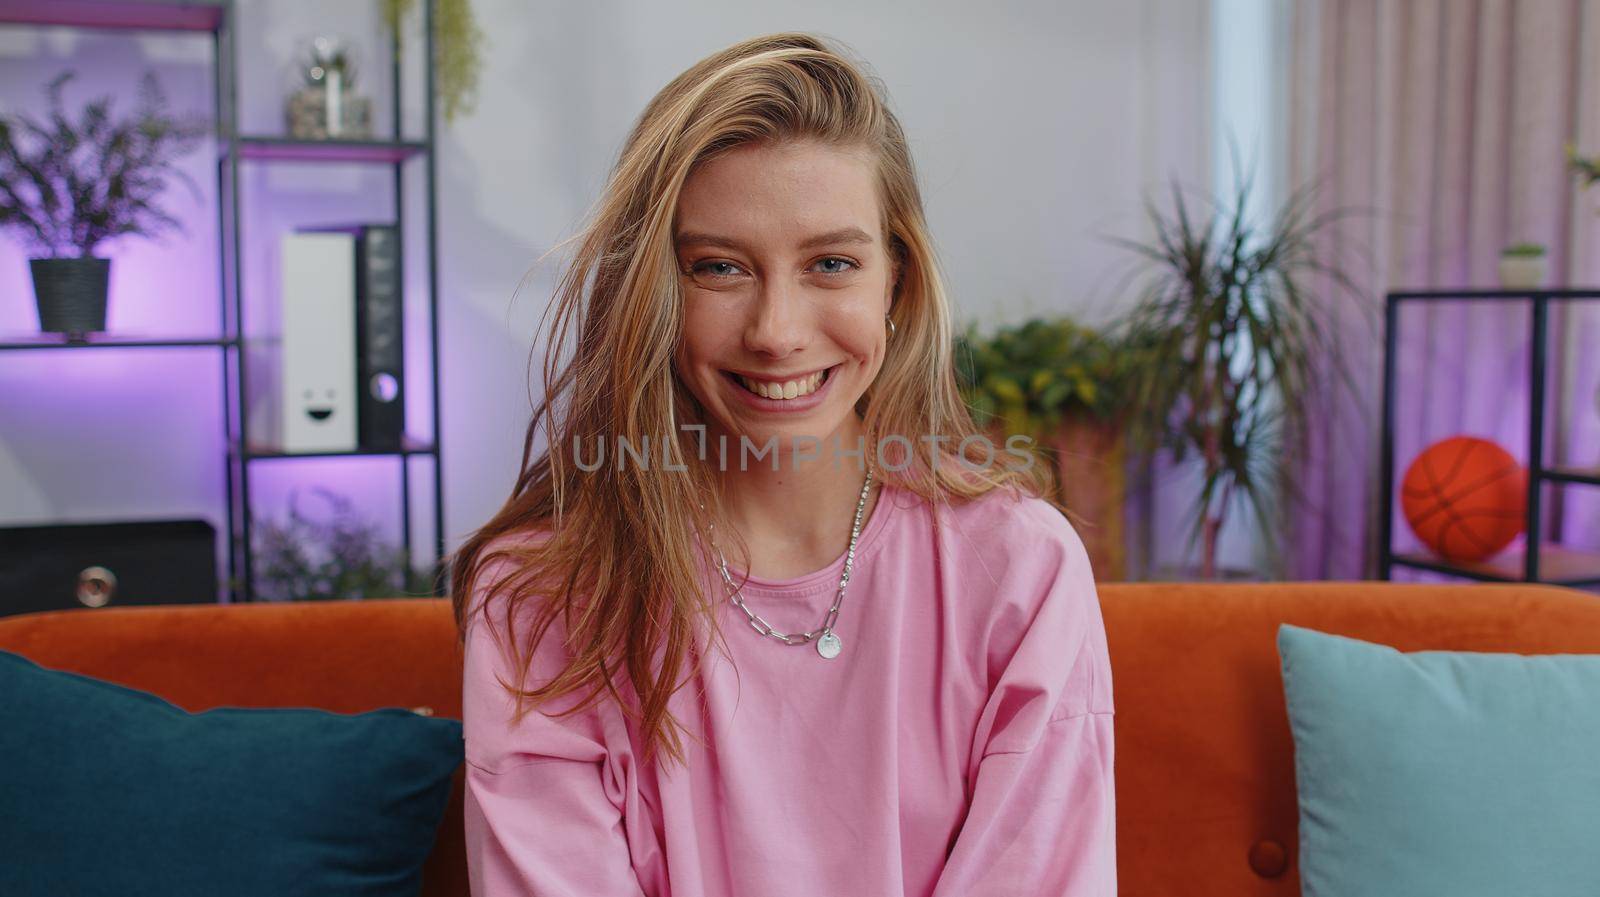 Close-up portrait of happy smiling caucasian girl in hoodie, looking at camera, celebrate good news. Young woman indoor isolated at home in living room sitting on orange couch. Female nature beauty